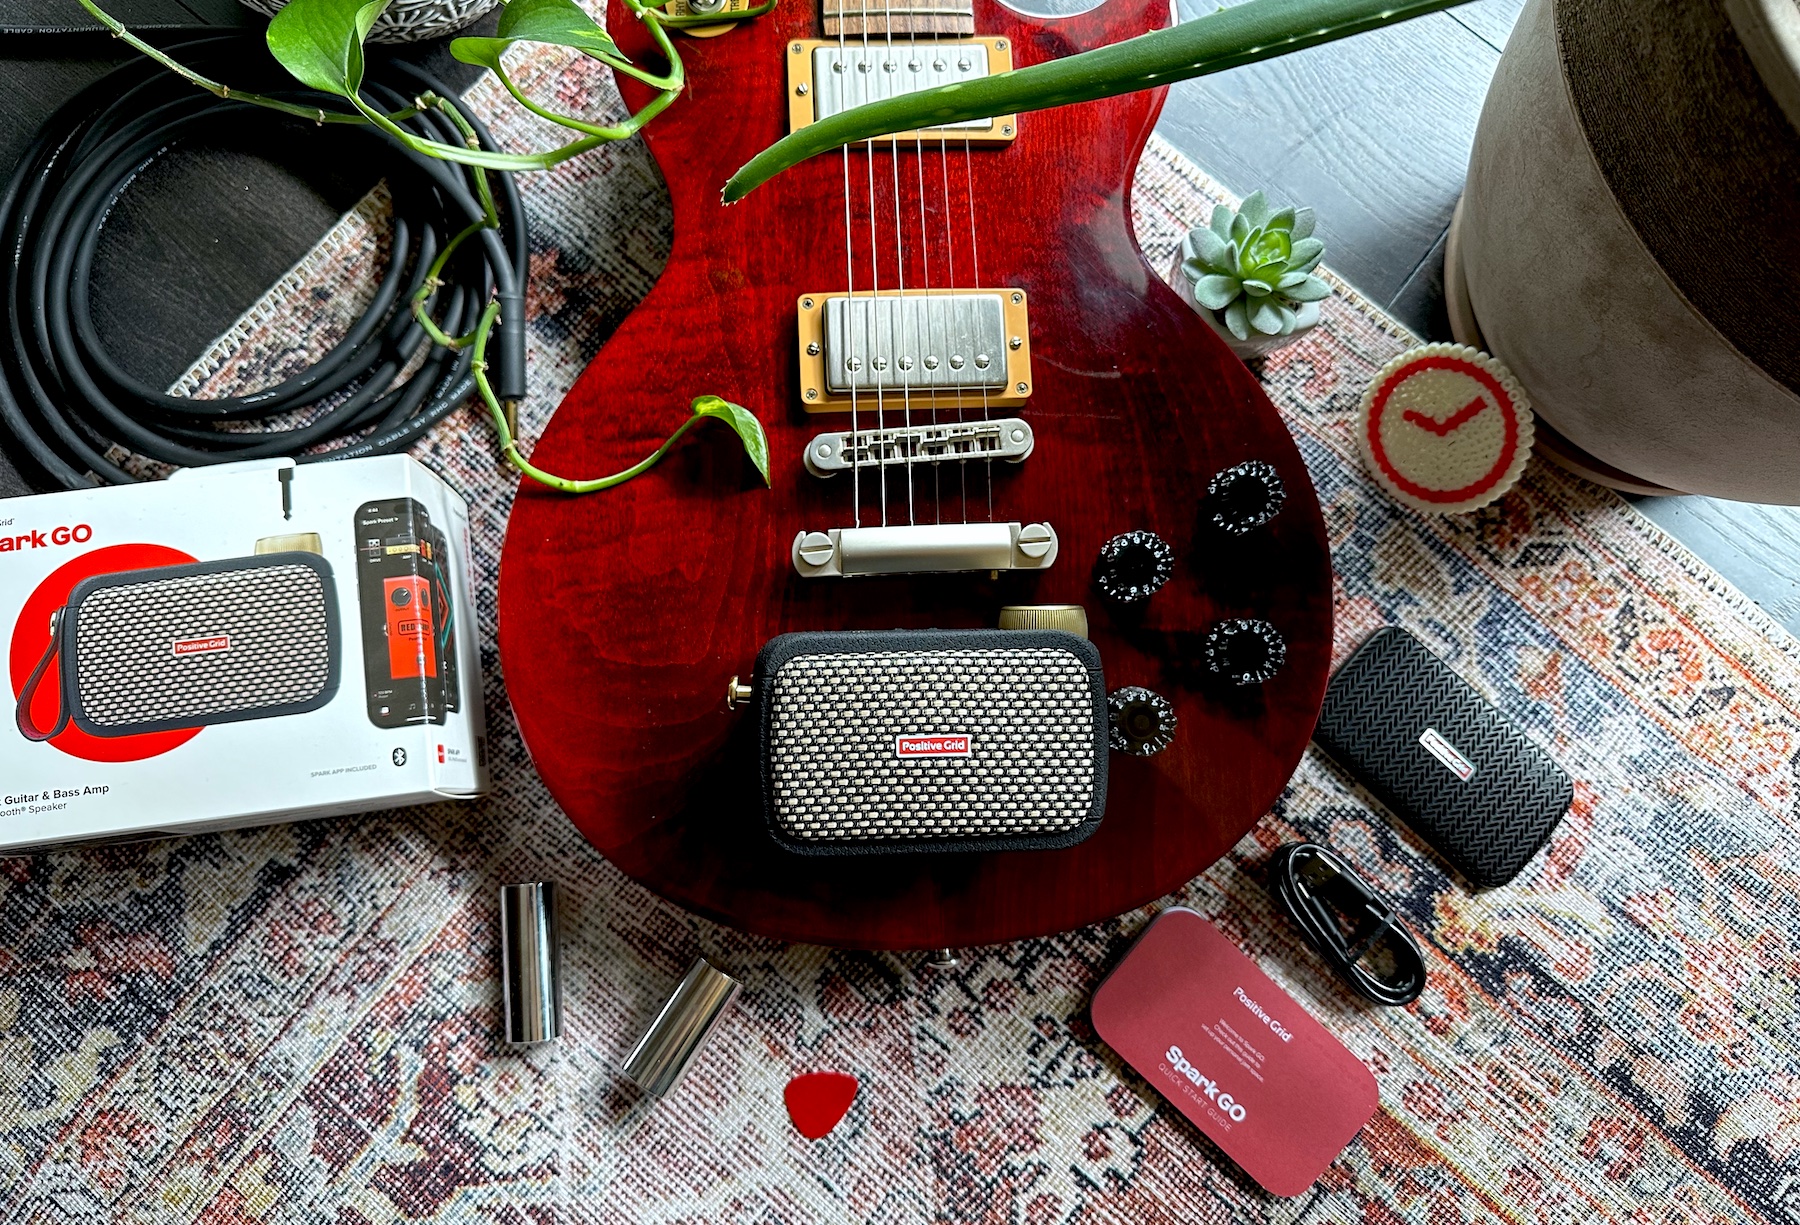 Gift the Spark GO mini smart guitar amp and Bluetooth speaker at the $99  Black Friday price